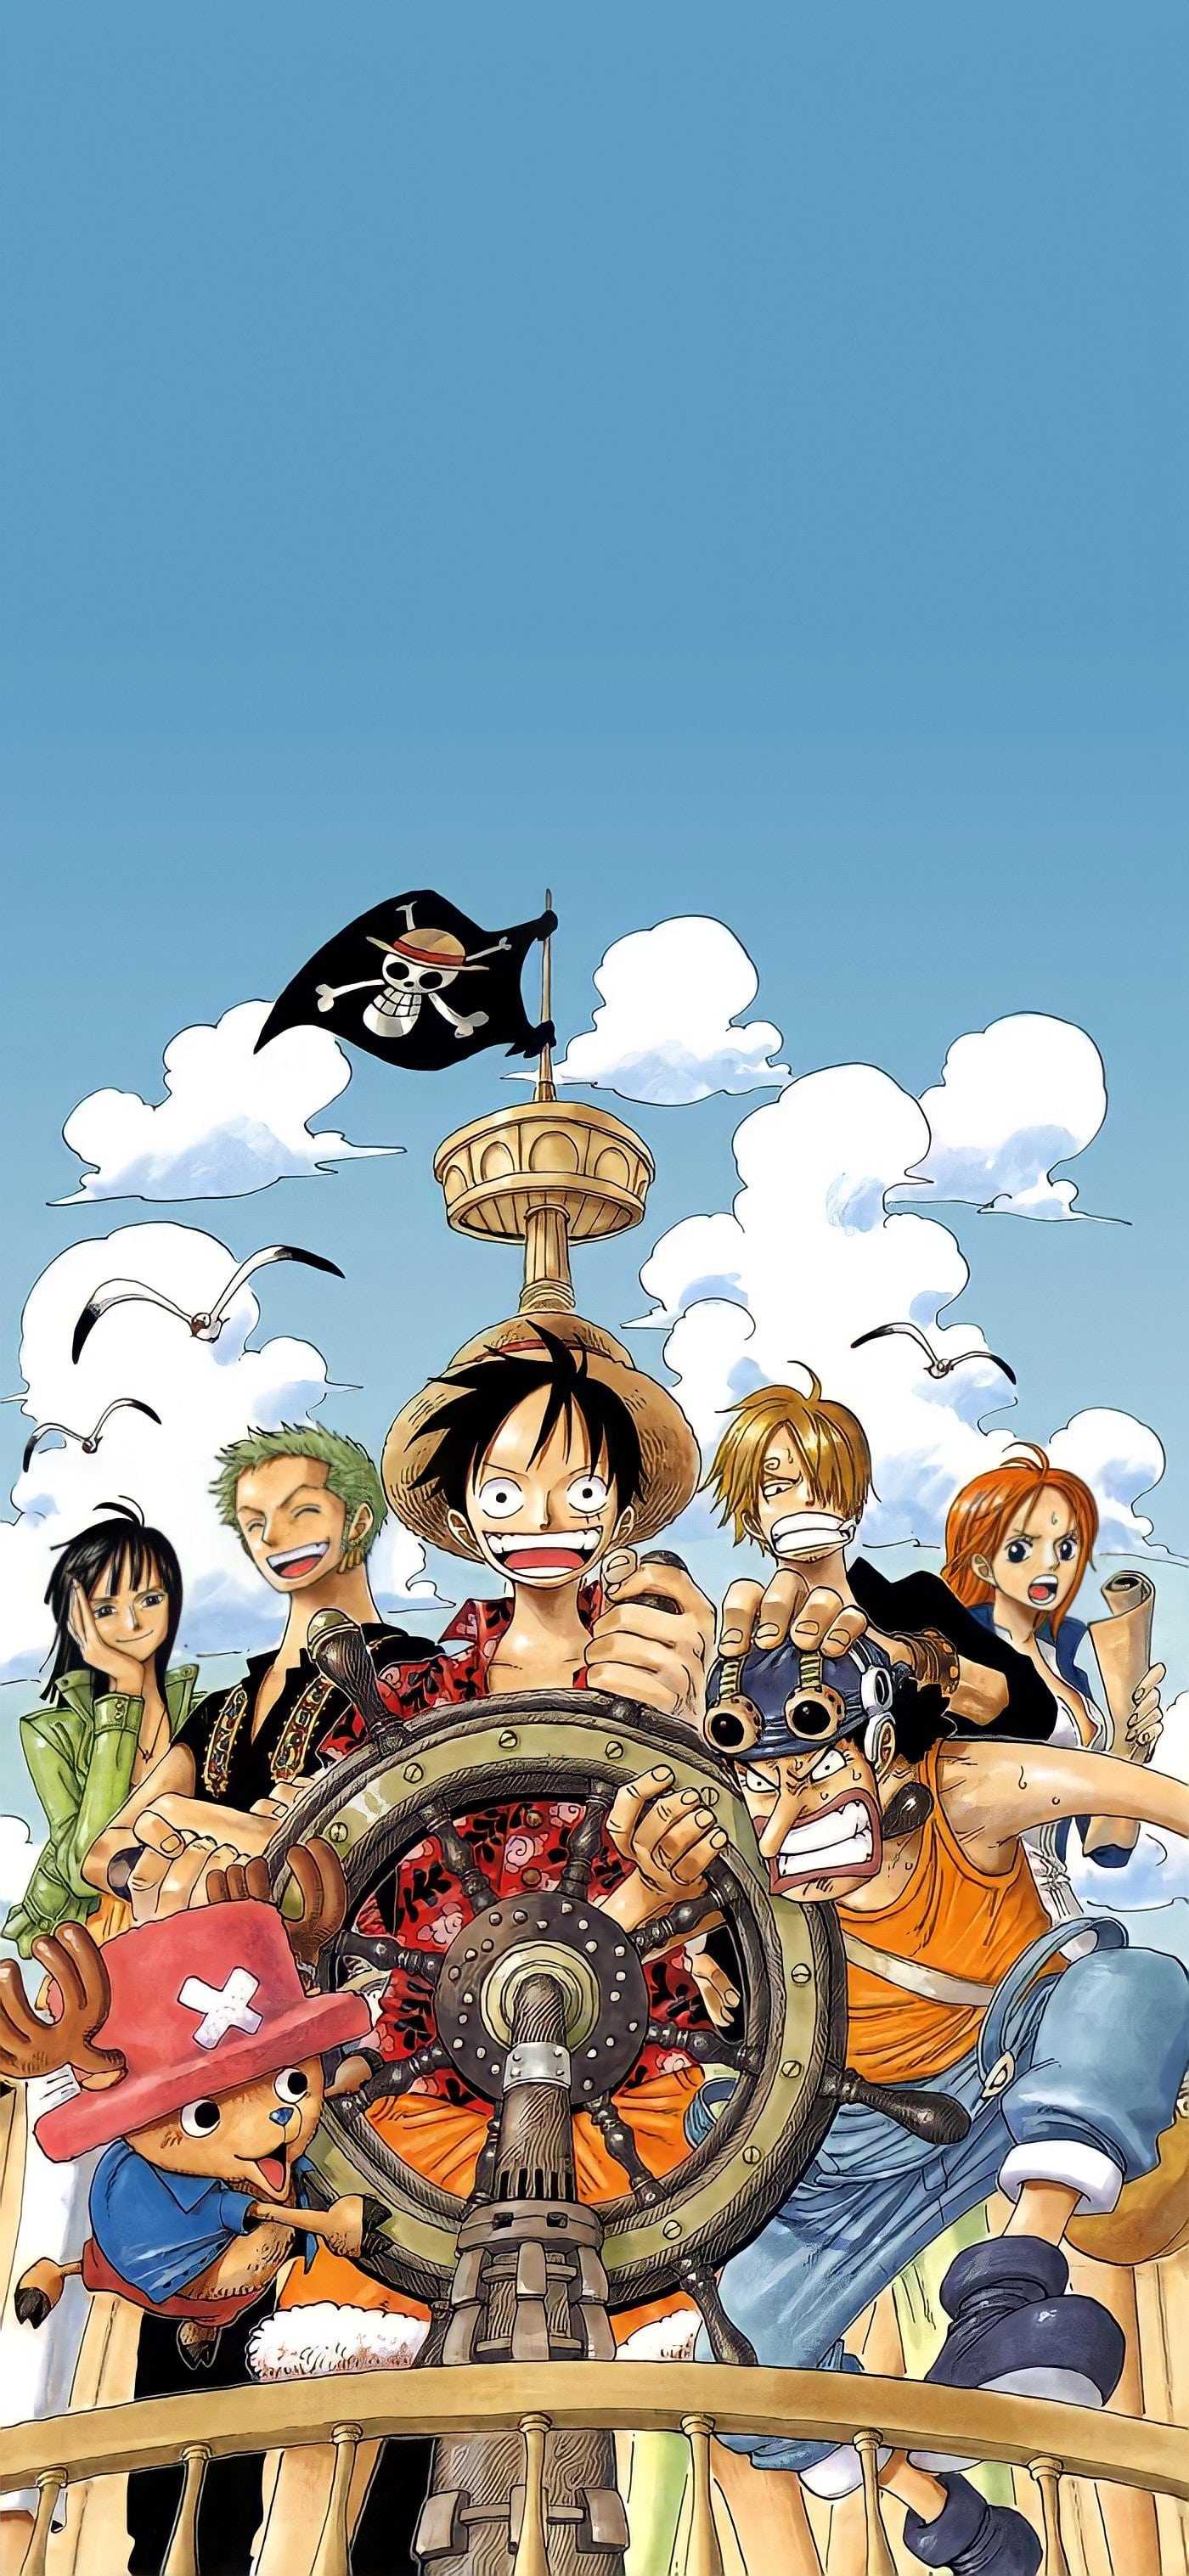 One Piece Background Spezial 02 by Backgrounds4you on DeviantArt